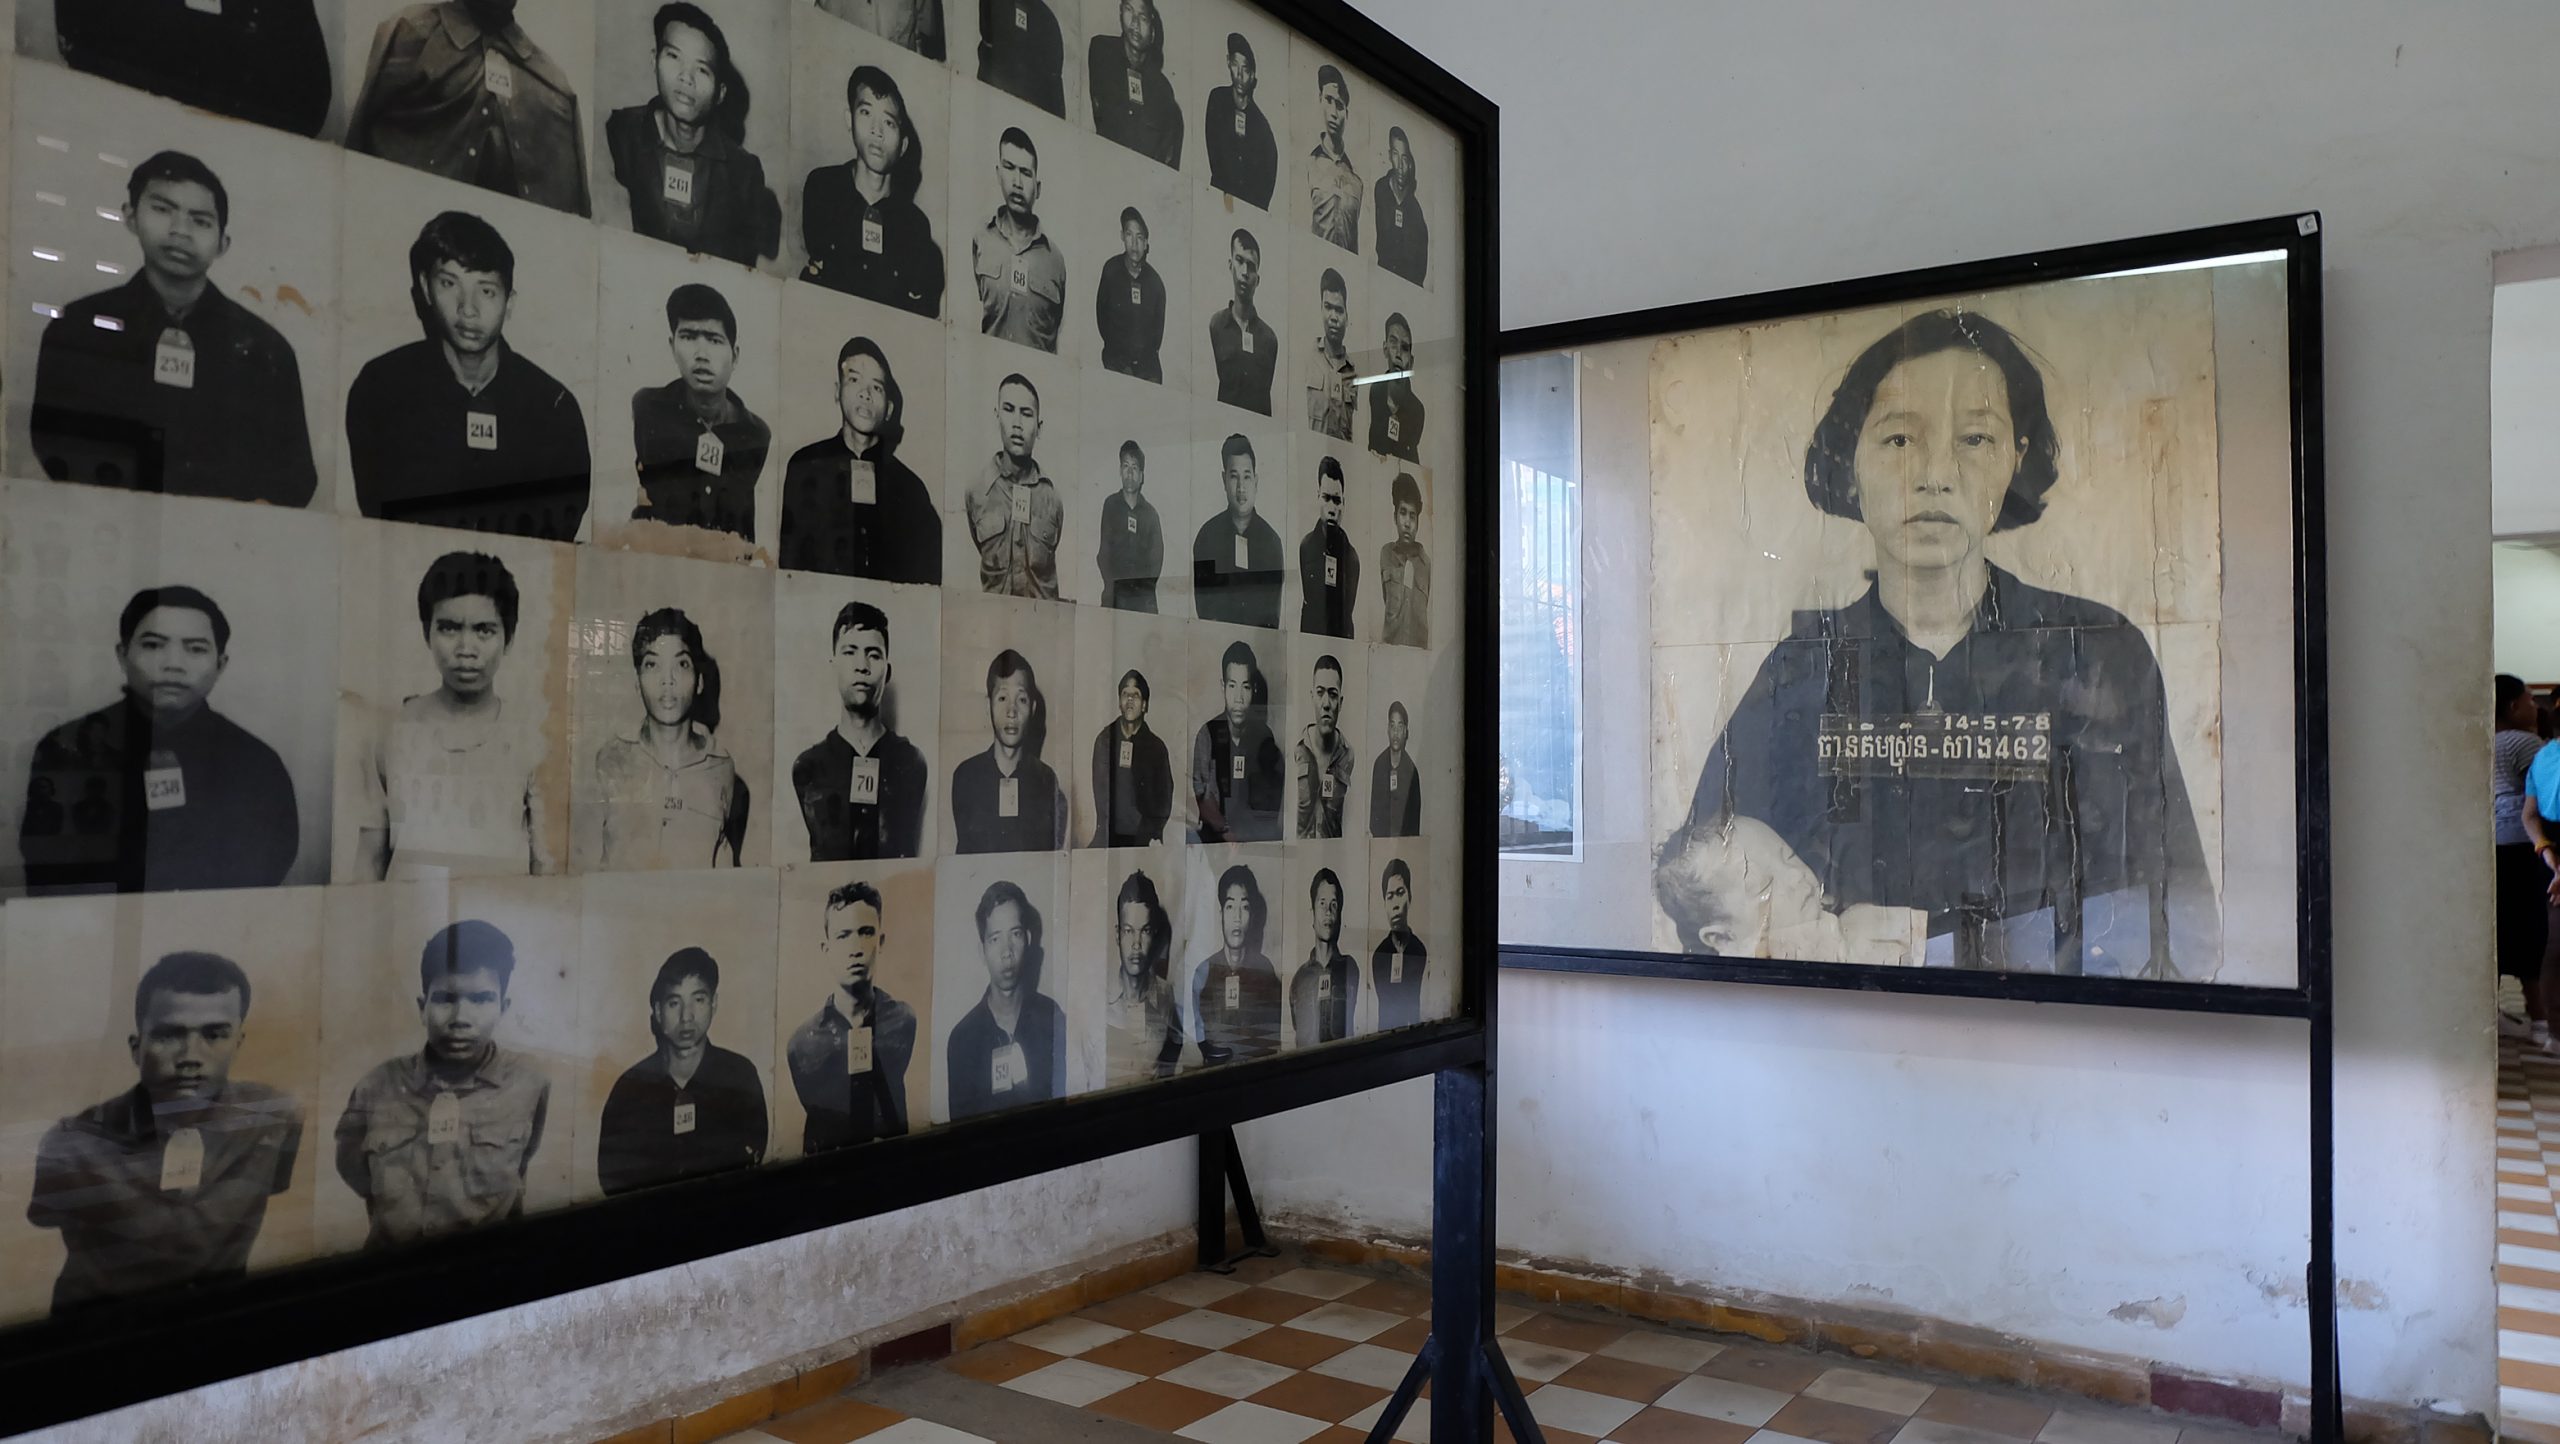 Images of victims of the Cambodian Genocide